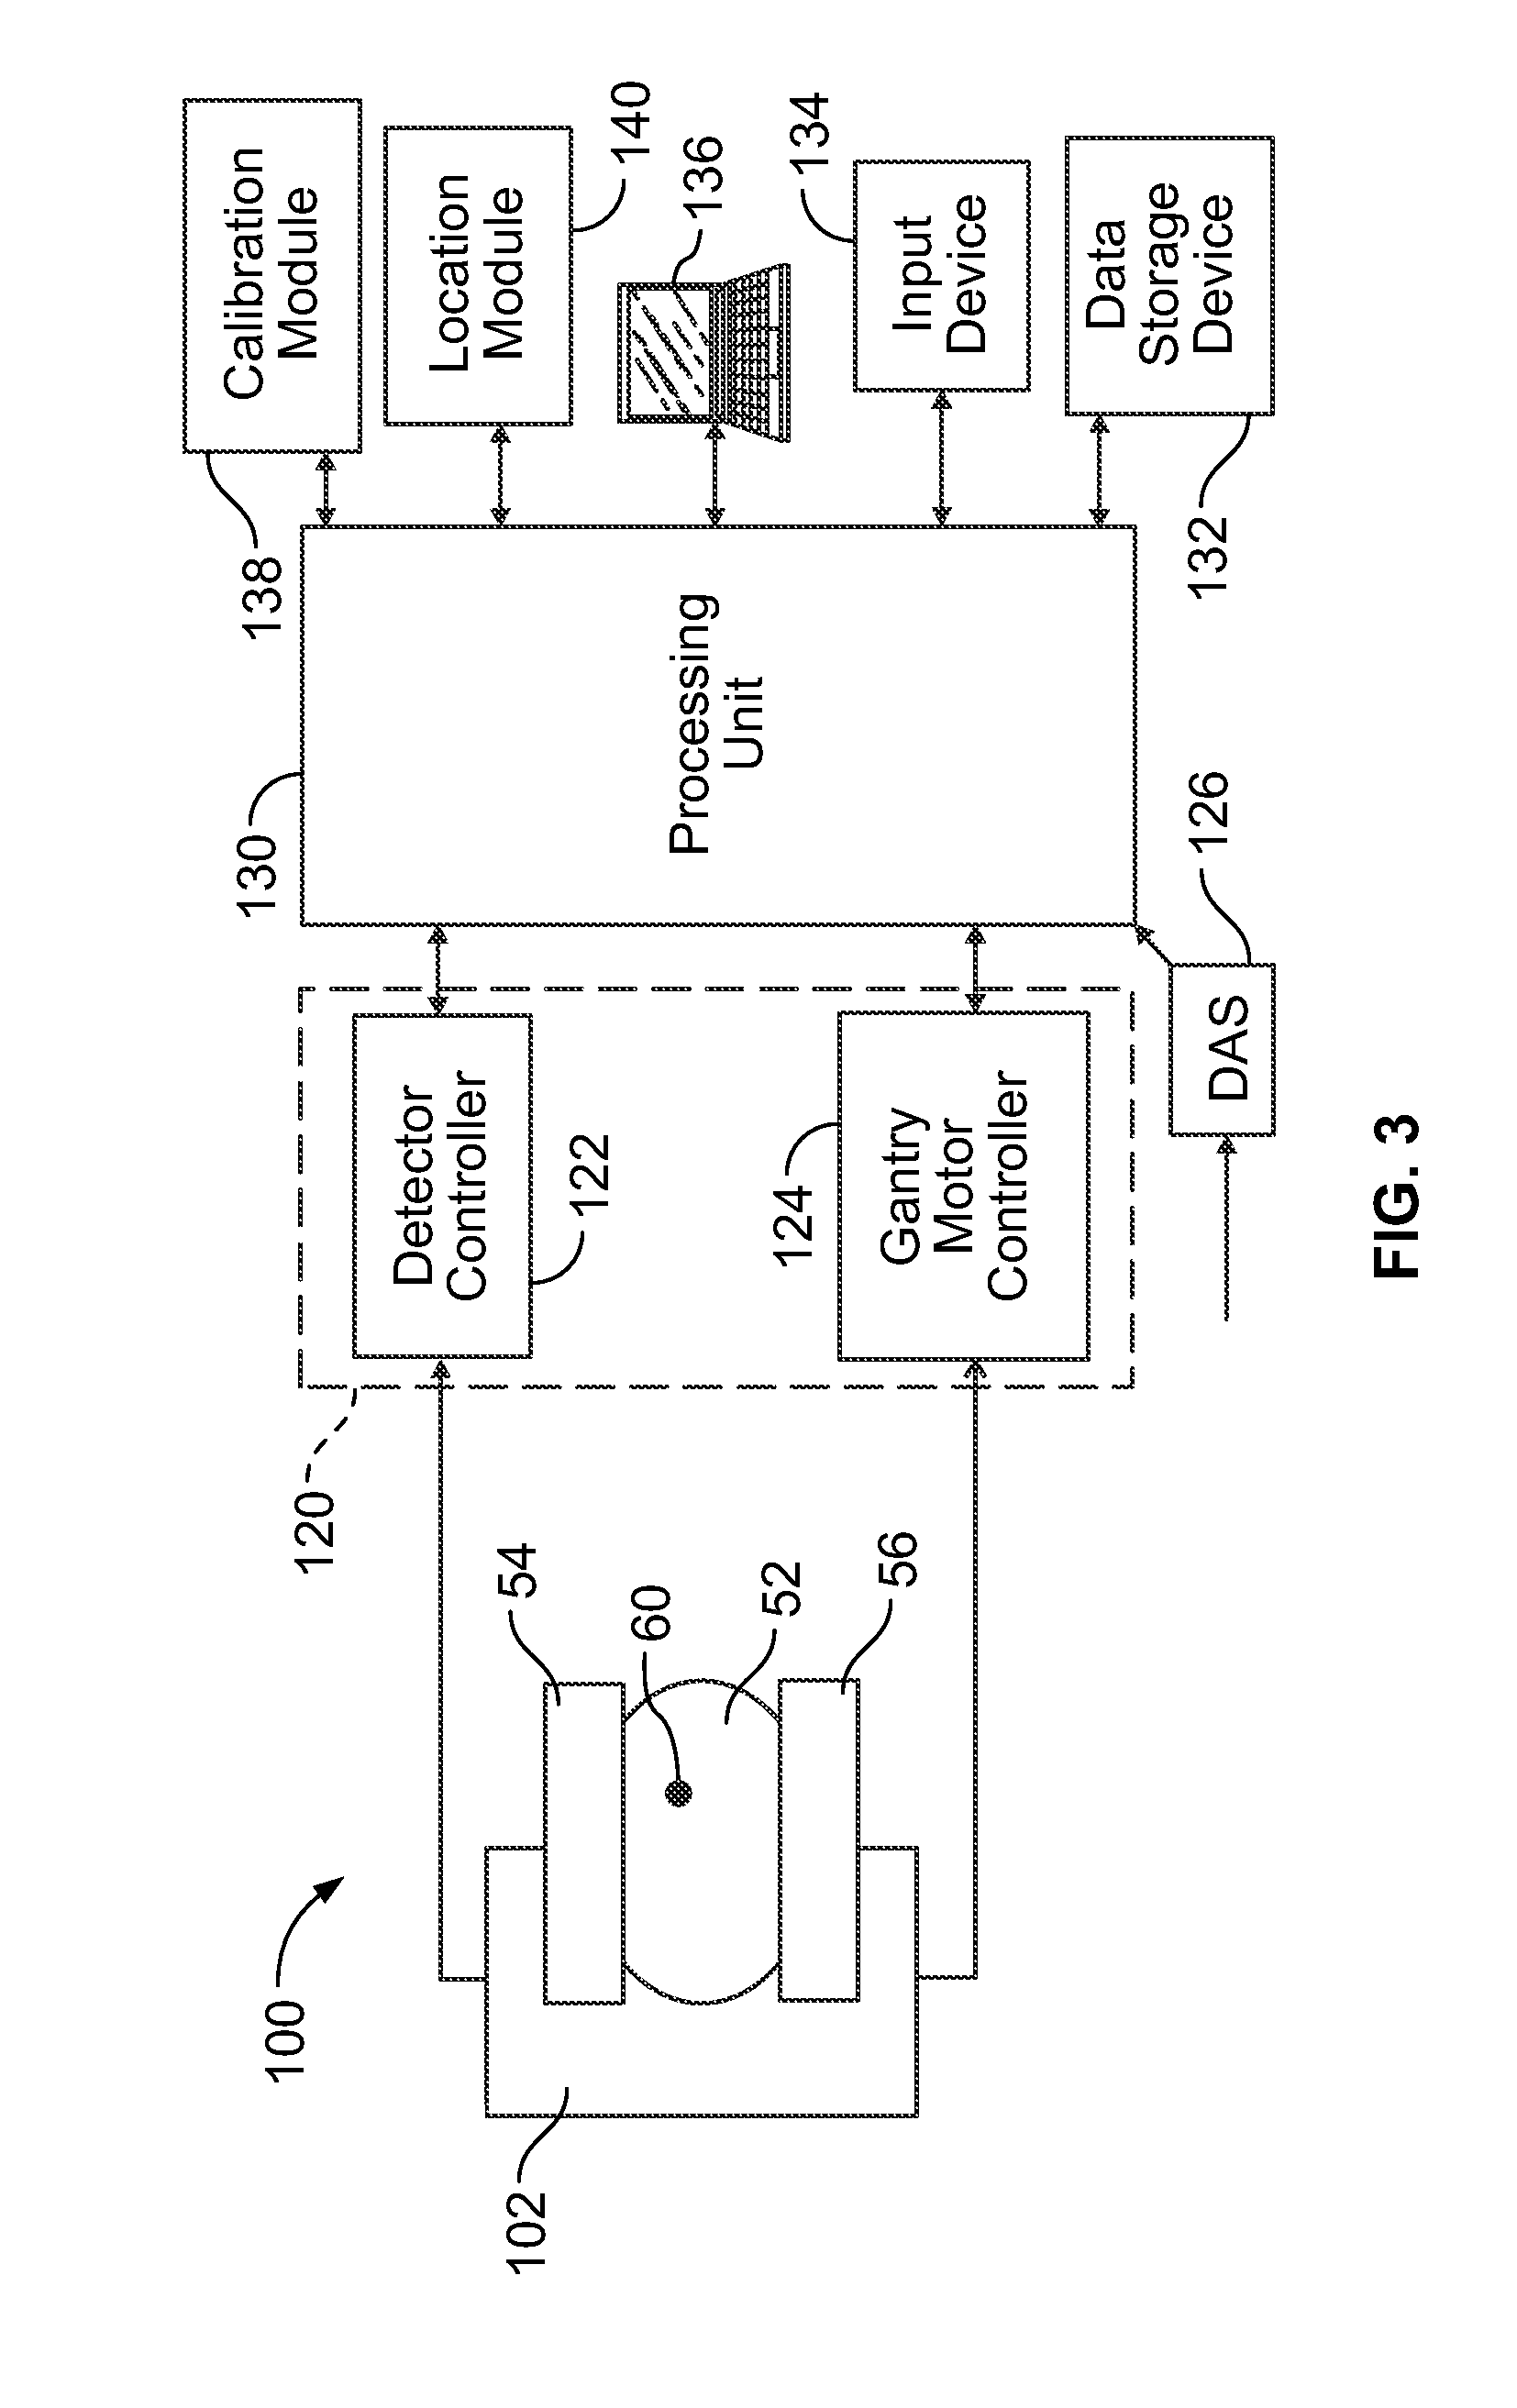 Systems and methods for determining a location of a lesion in a breast